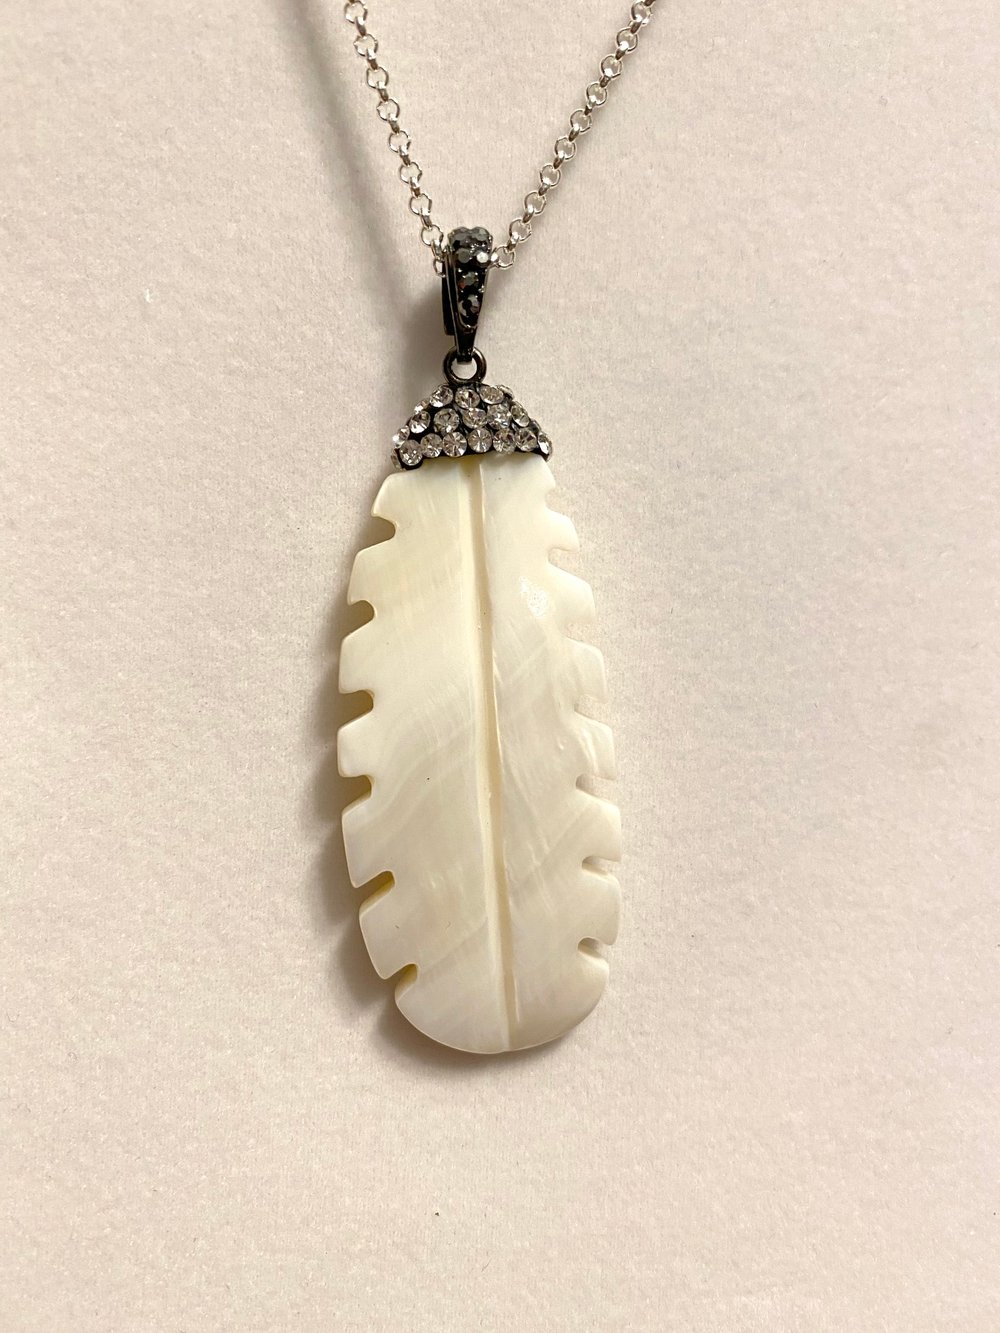 River Shell Feather Pendant and Silver Chain Necklace